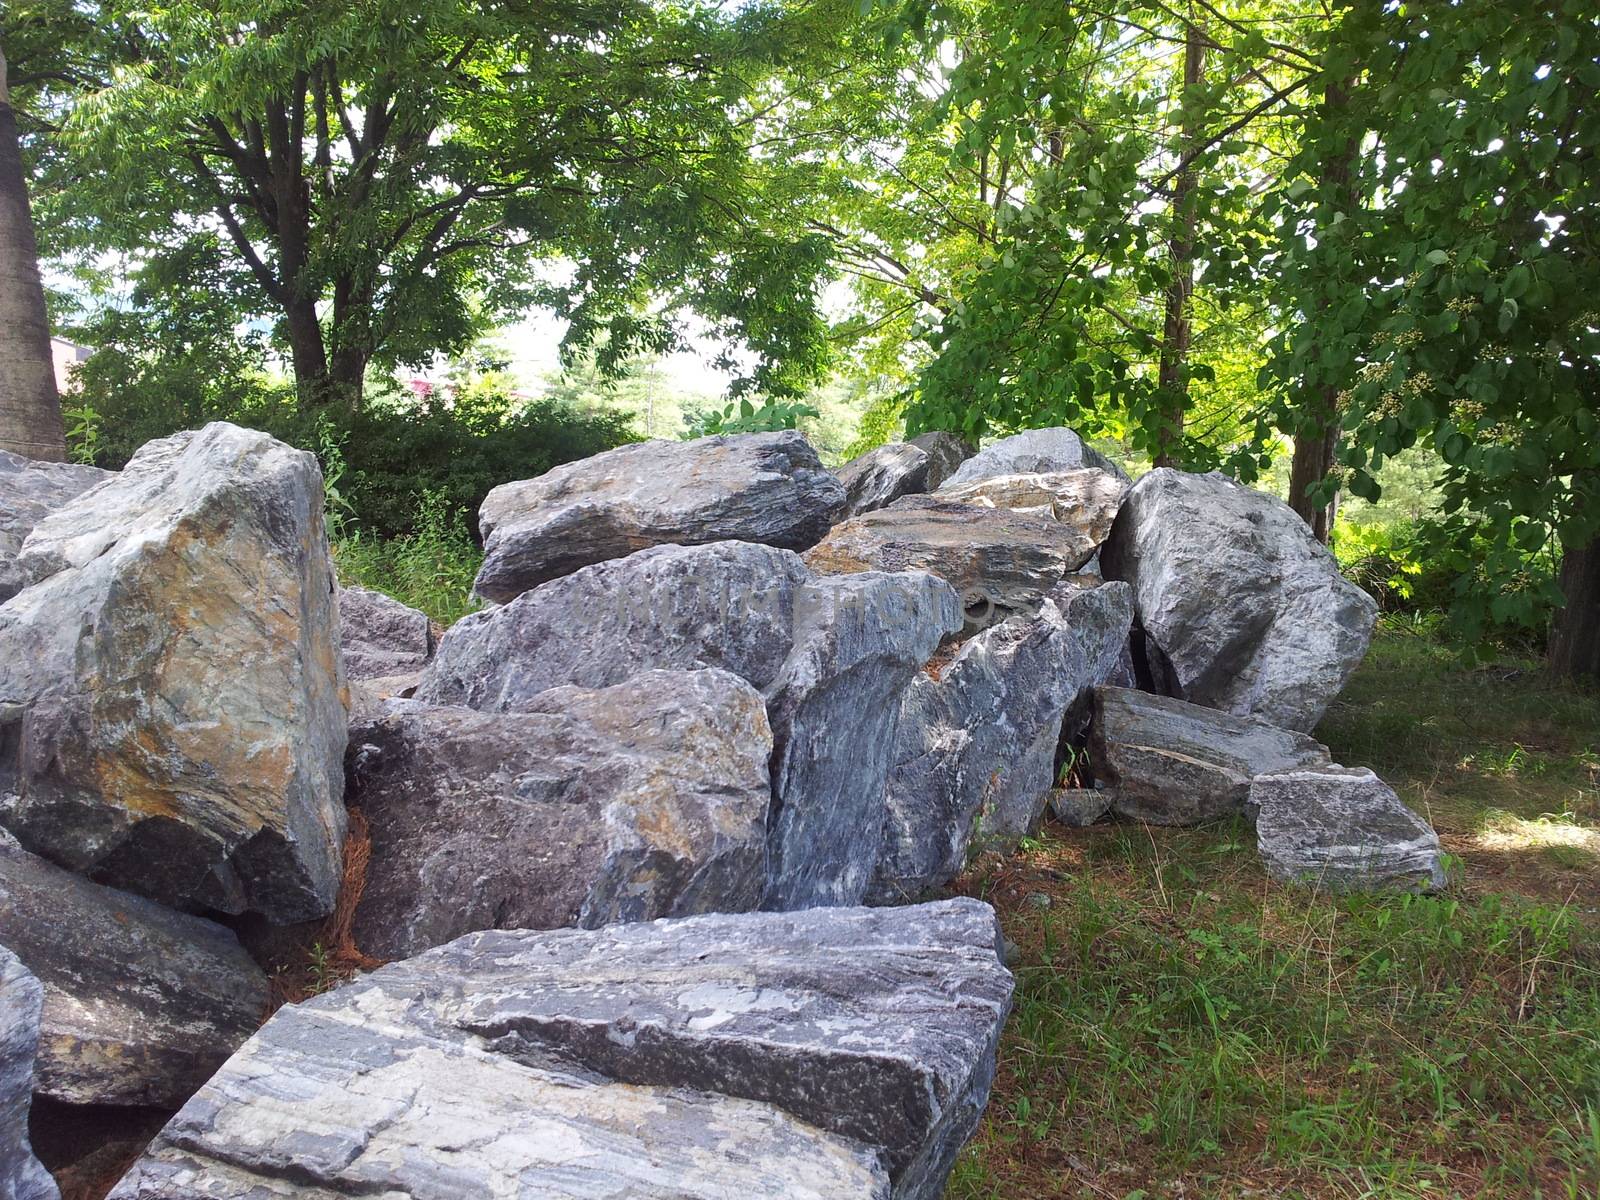 Large stones or rock settled in between green trees in a public park by Photochowk